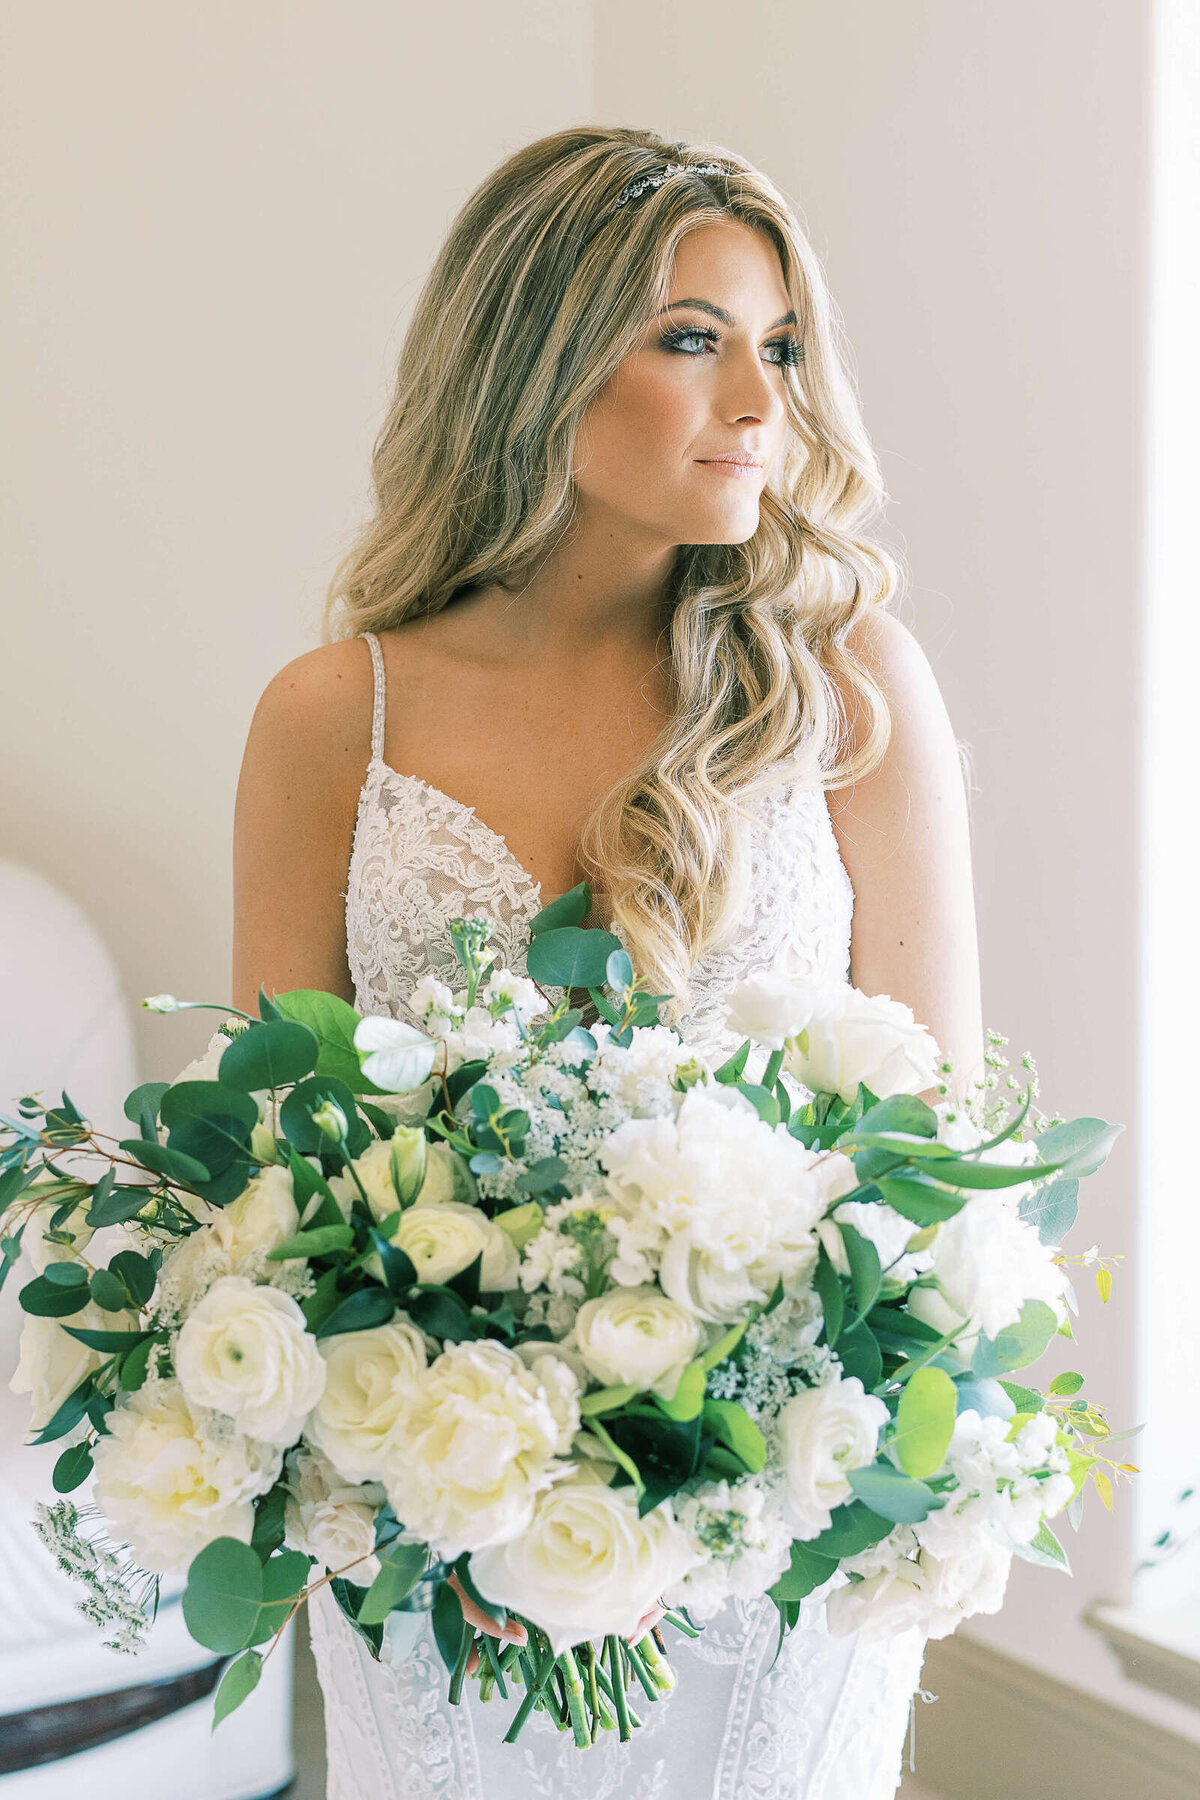 Elegant bride looks into the distance while holding large white wedding bouquet